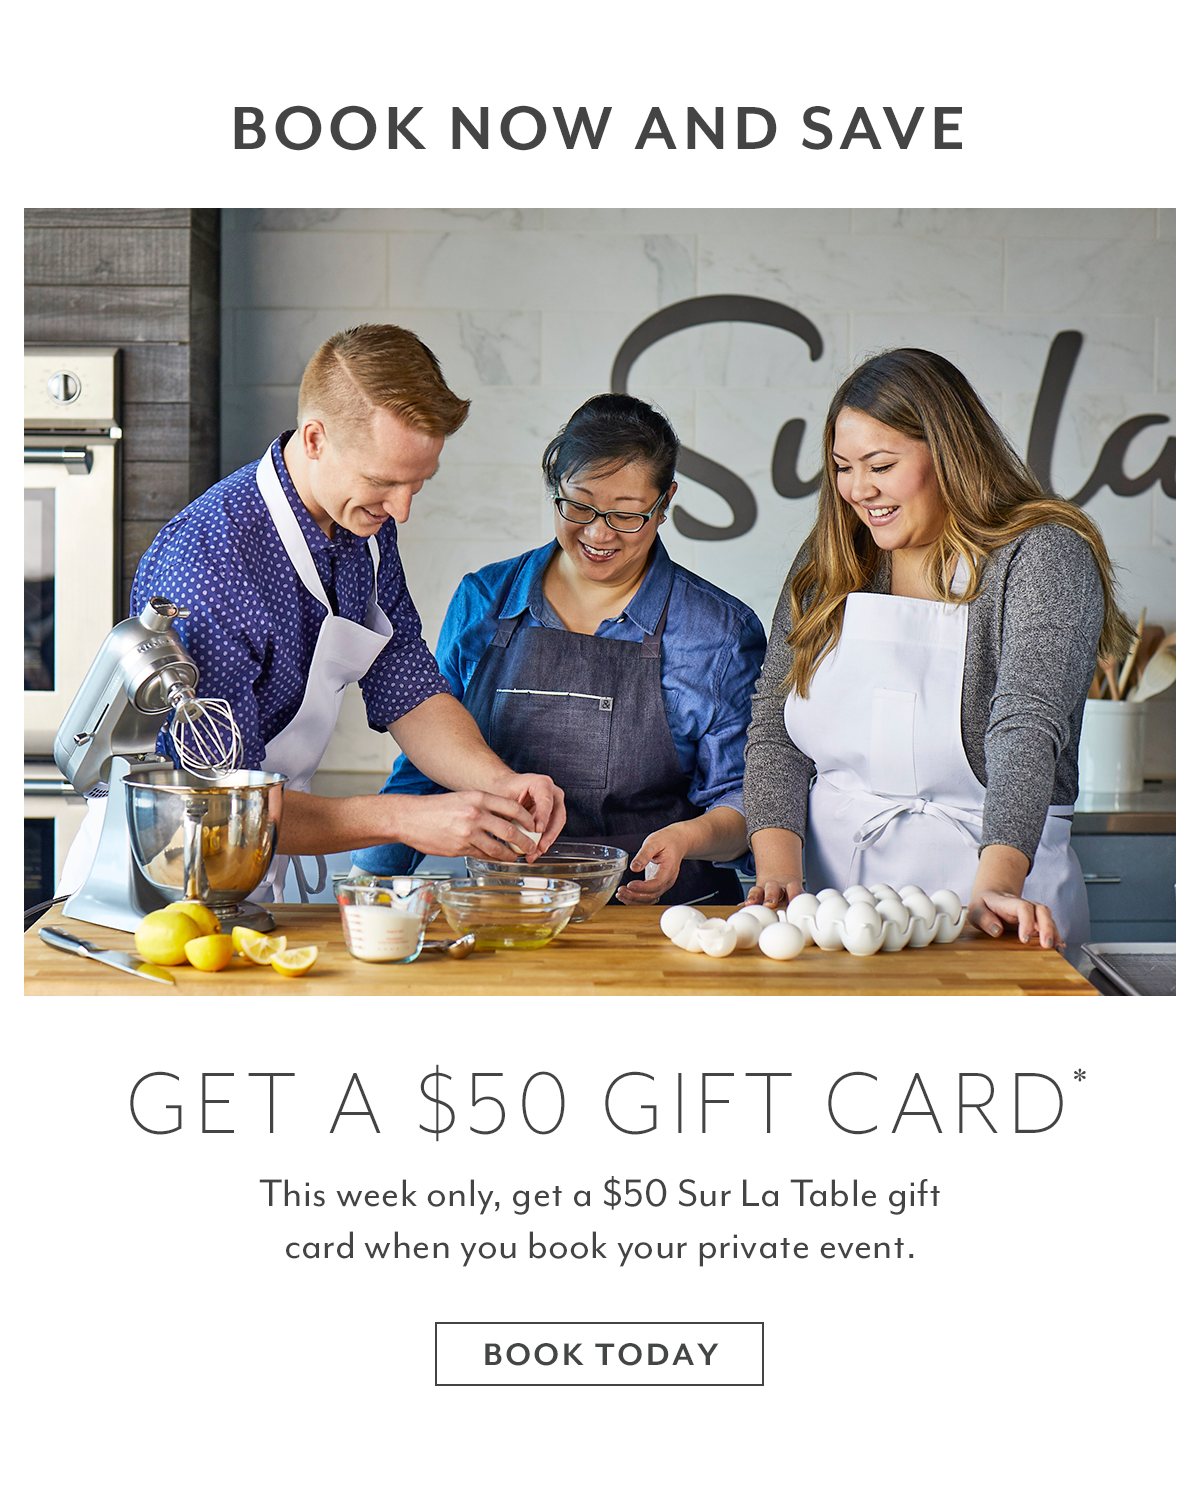 Get a $50 Gift Card